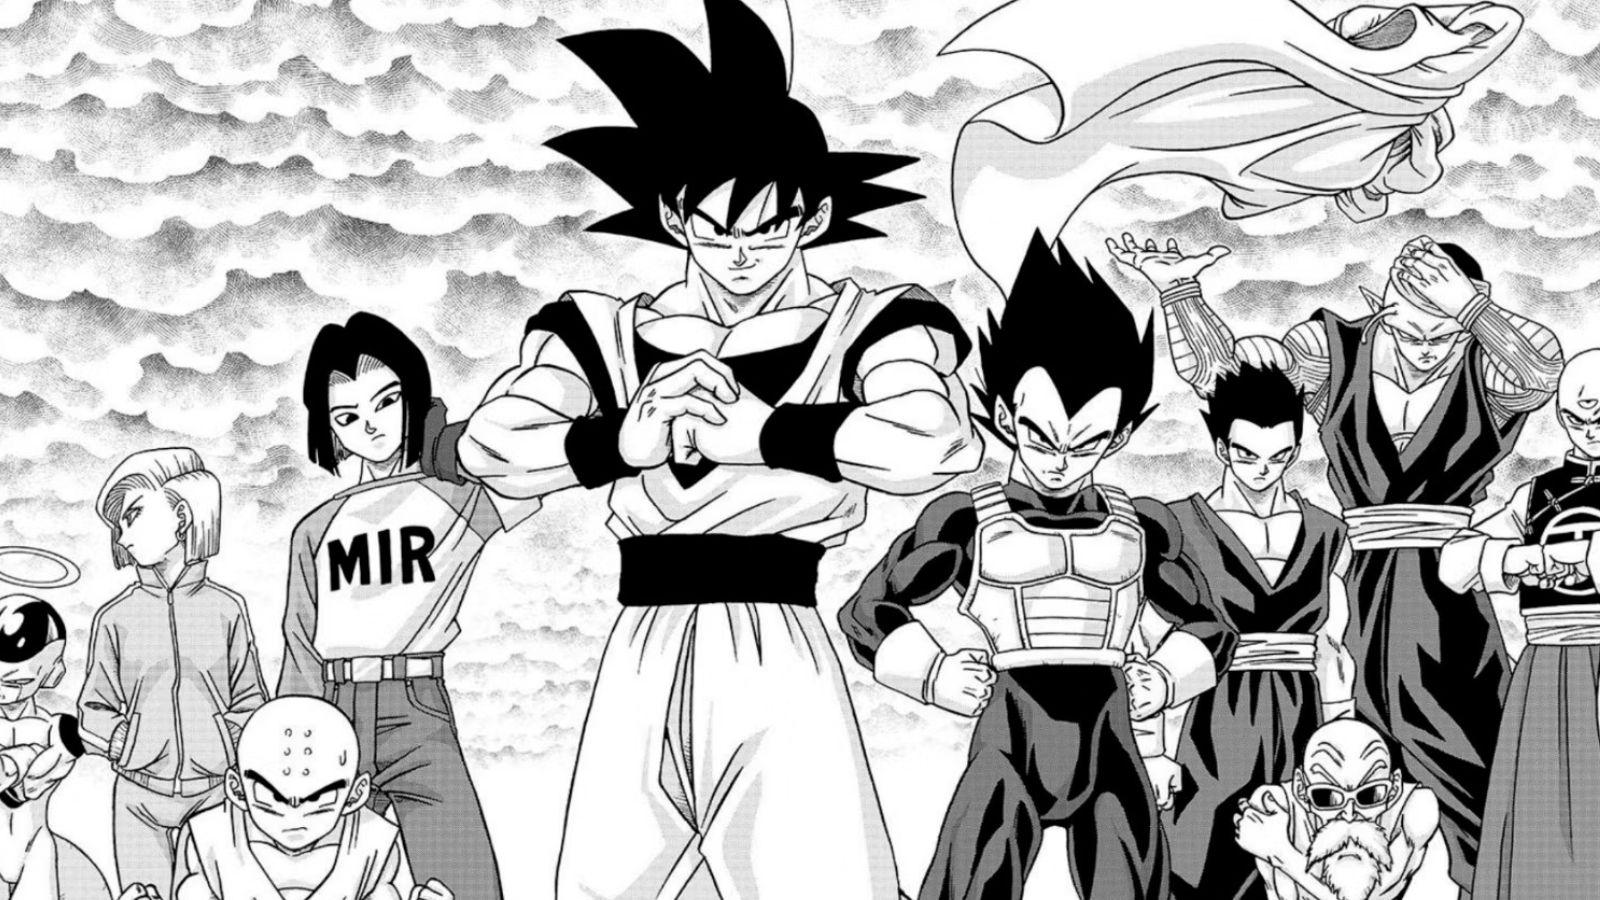 Dragon Ball Super Manga Chapter 75 is Out Now. At https